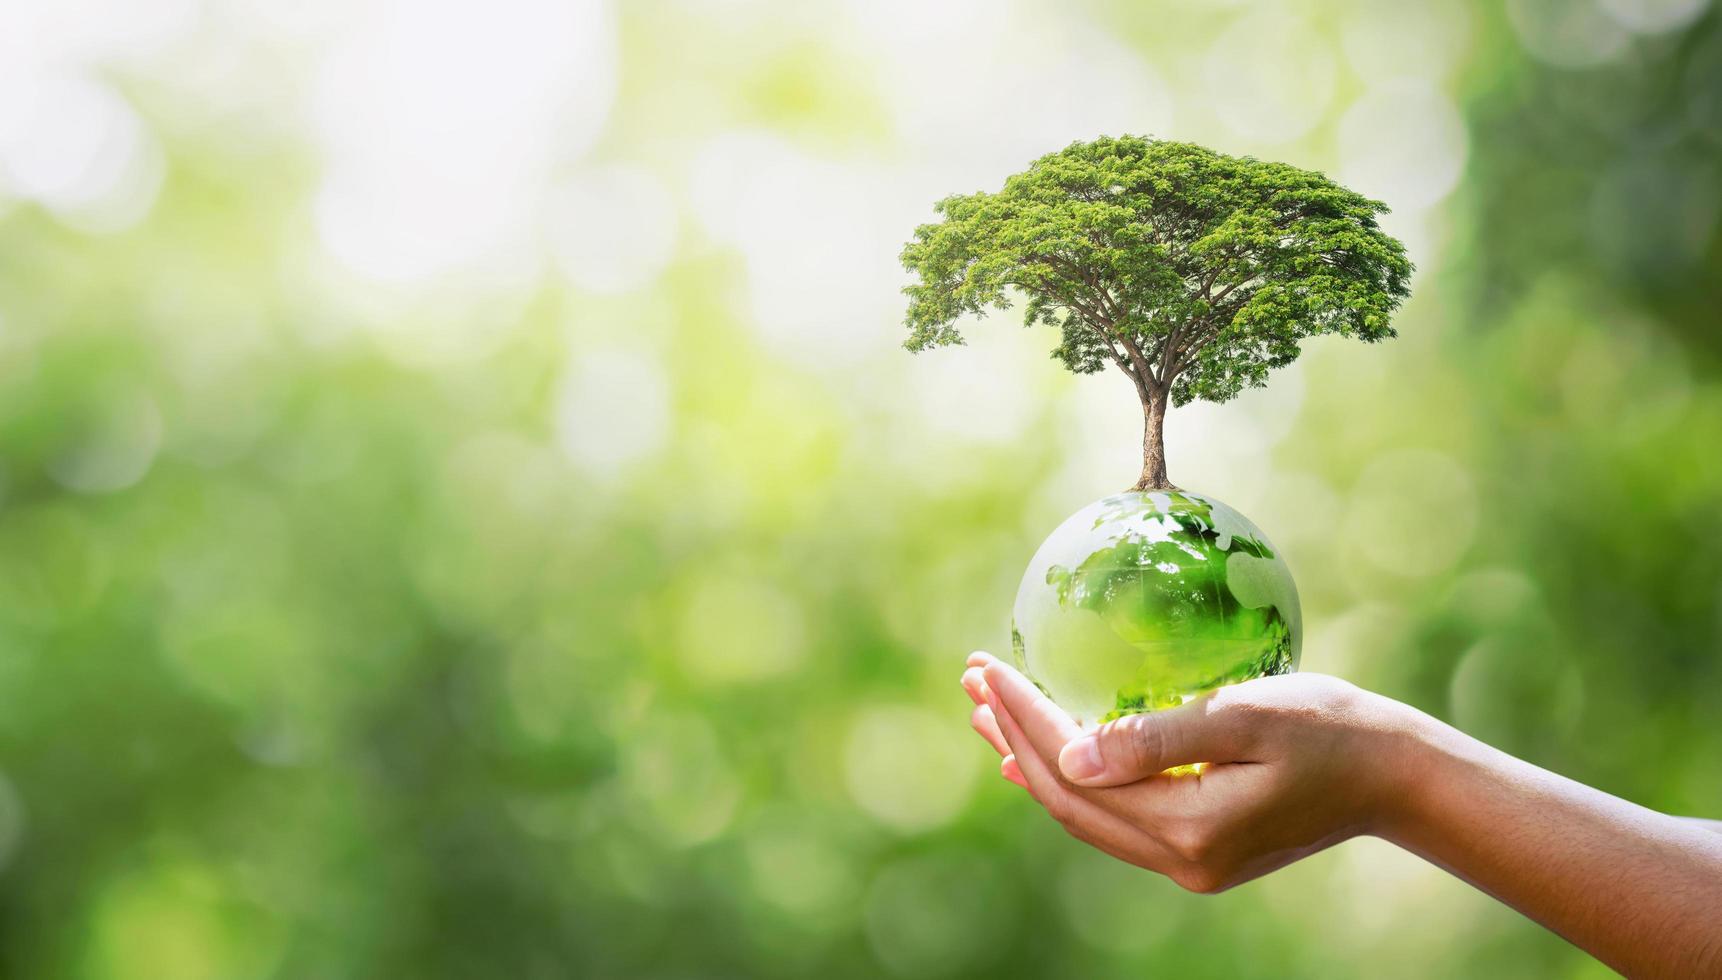 hand holding glass globe with planting trees and blurry green nature ecological concept photo